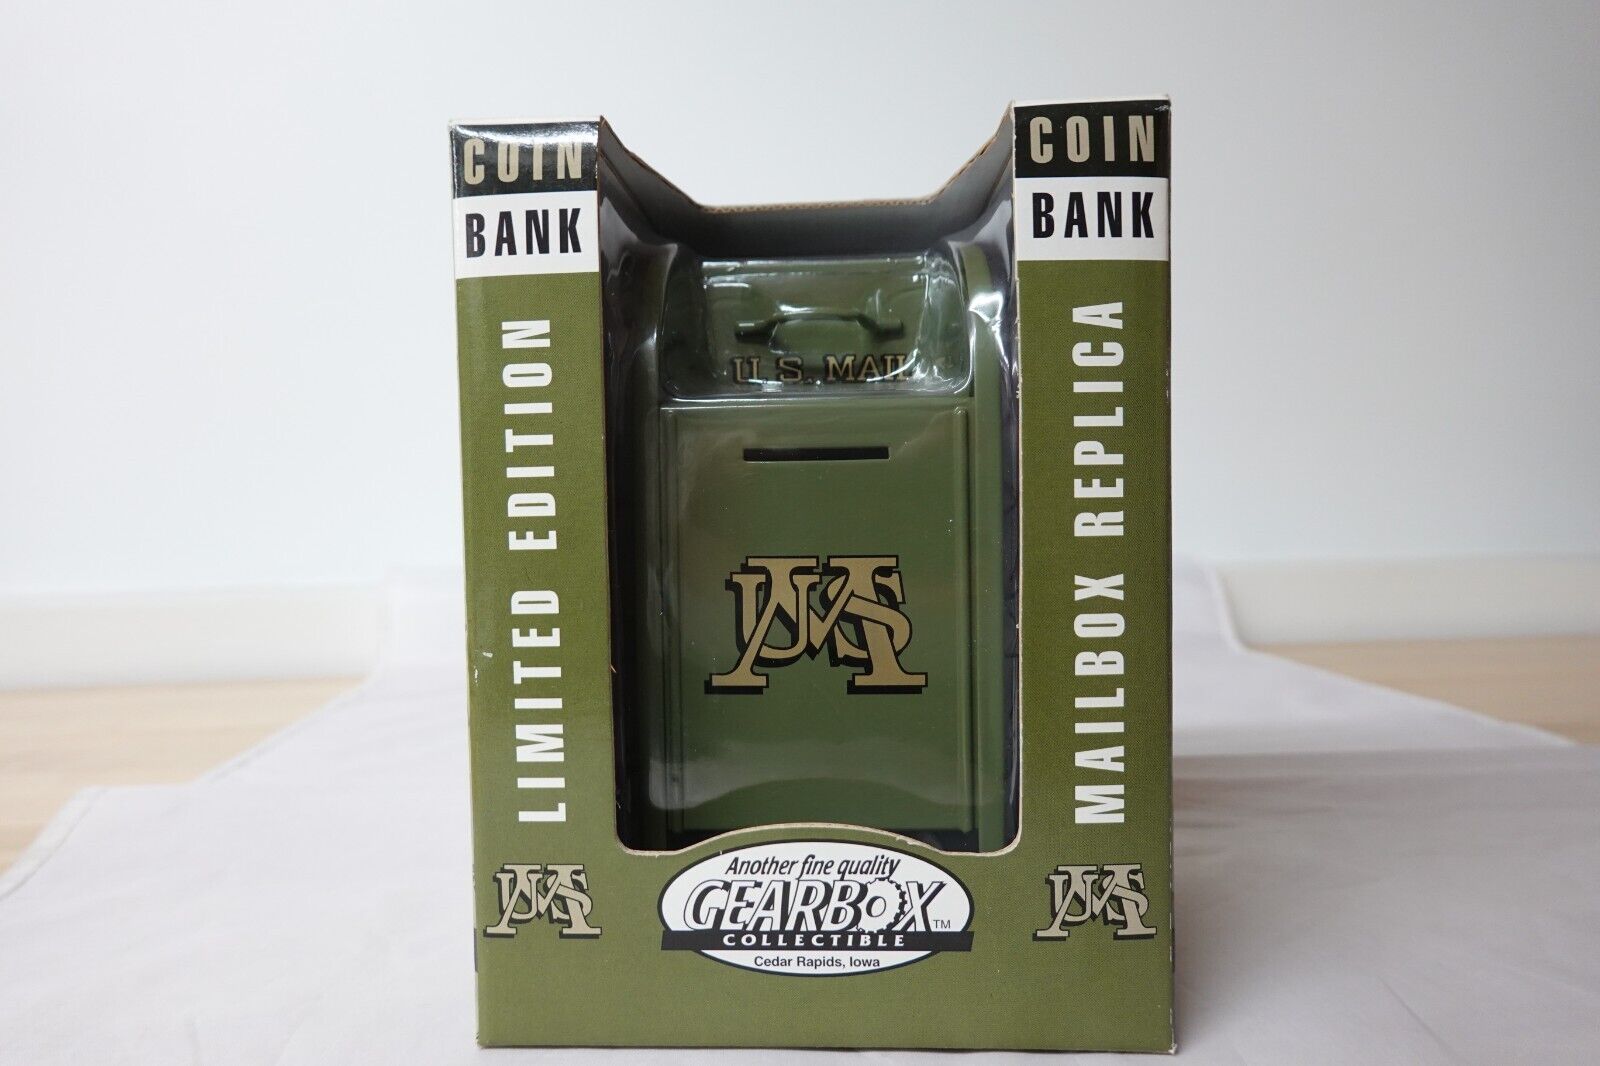 GEARBOX 01001 VINTAGE U S MAIL LIMITED EDITION COIN BANK